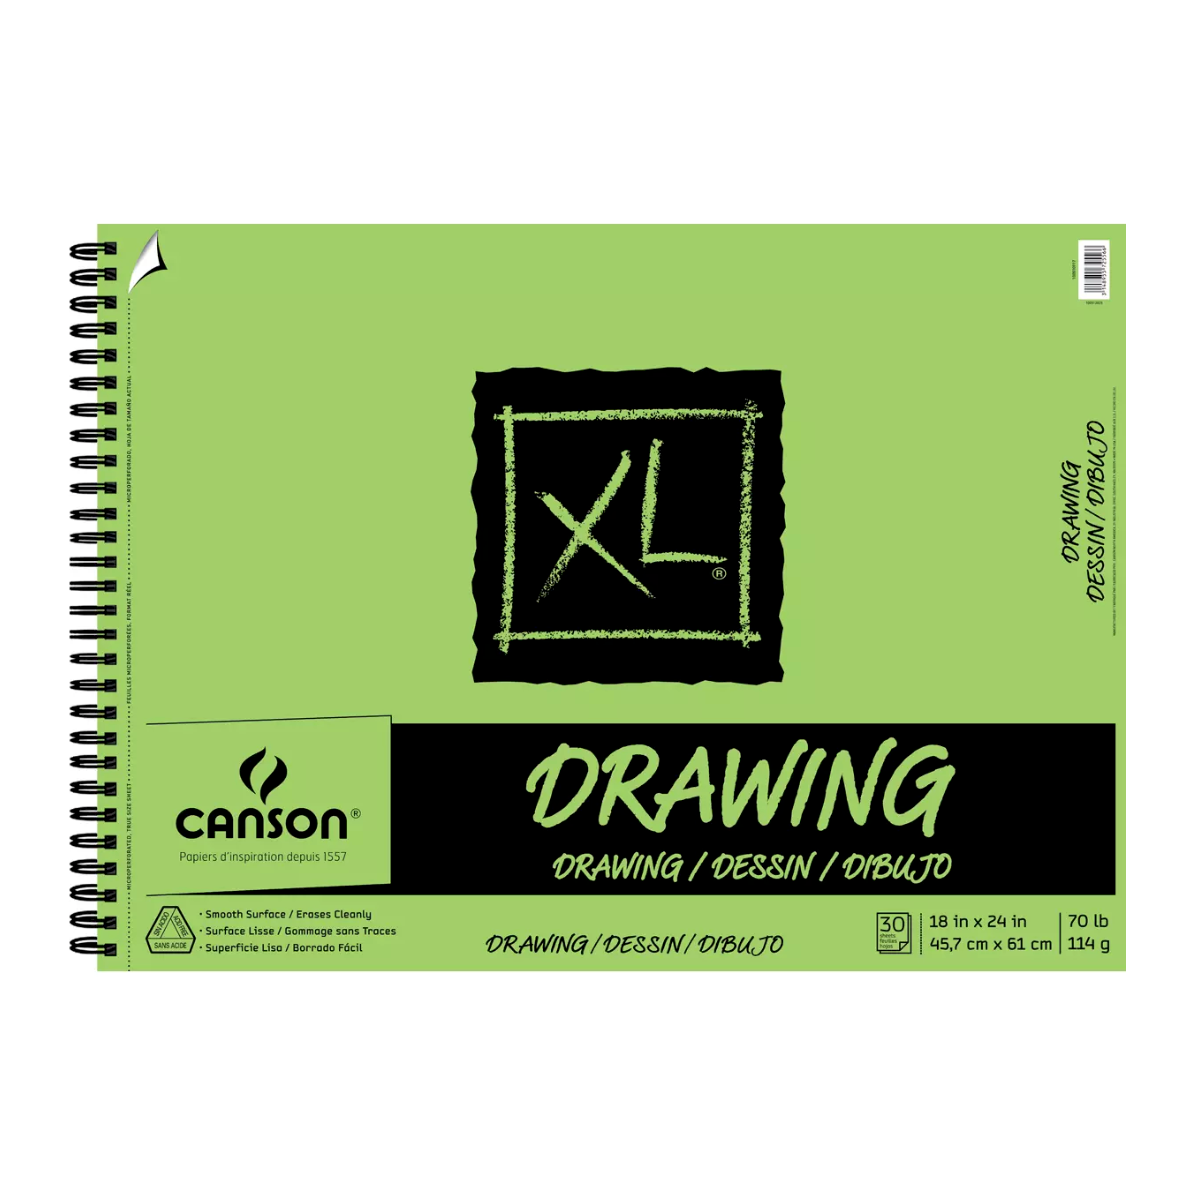 Canson XL Drawing Pad - 18 x 24 inches by Canson - K. A. Artist Shop